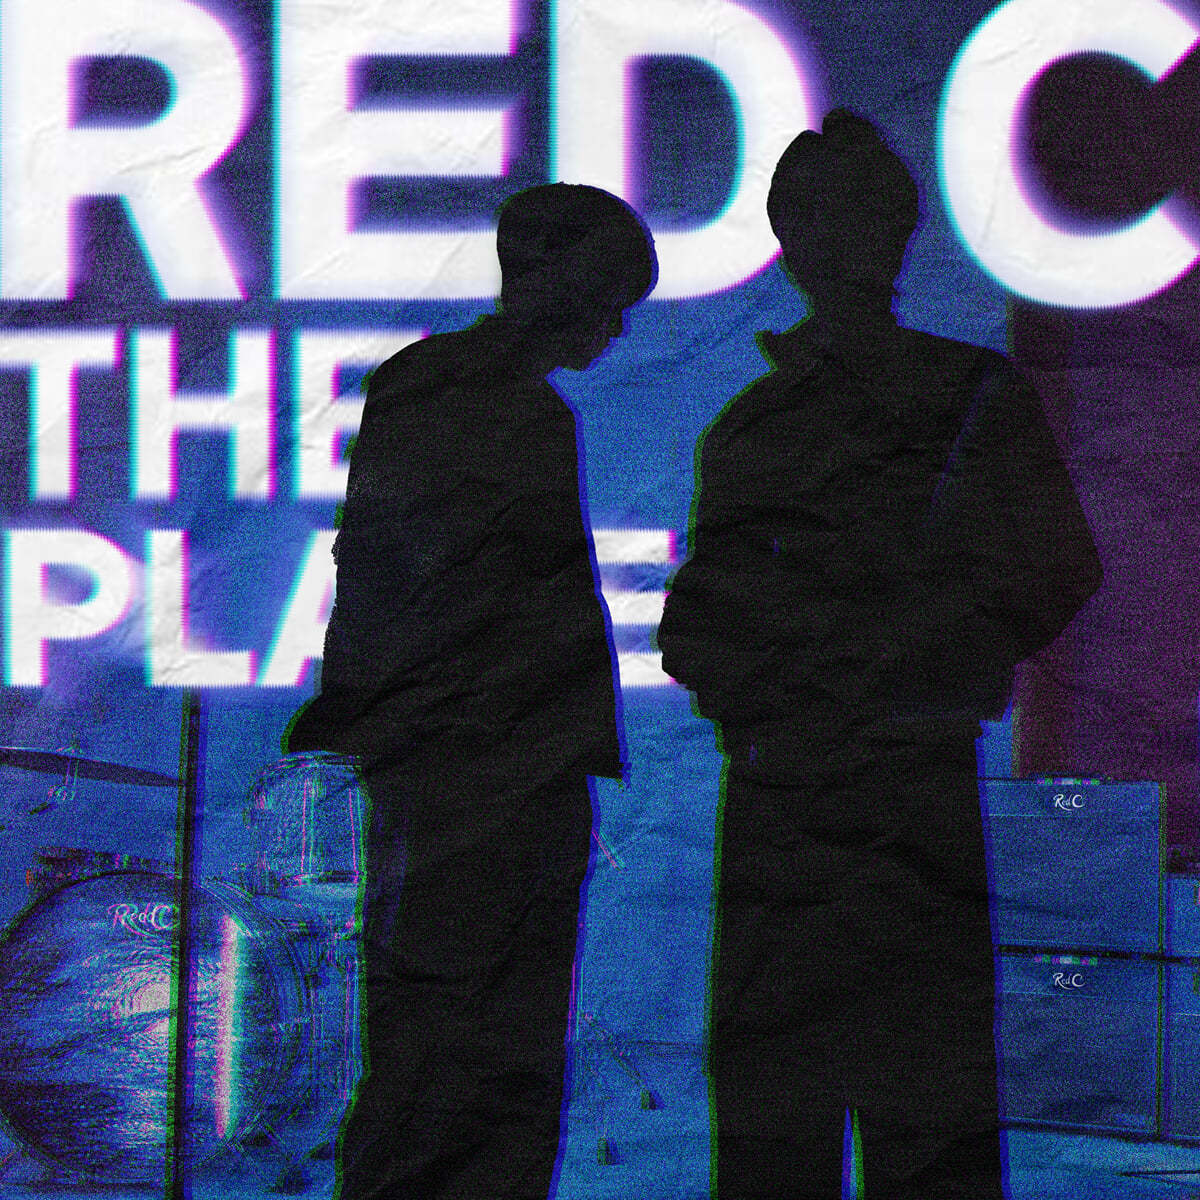 Red C (레드씨) - The Place